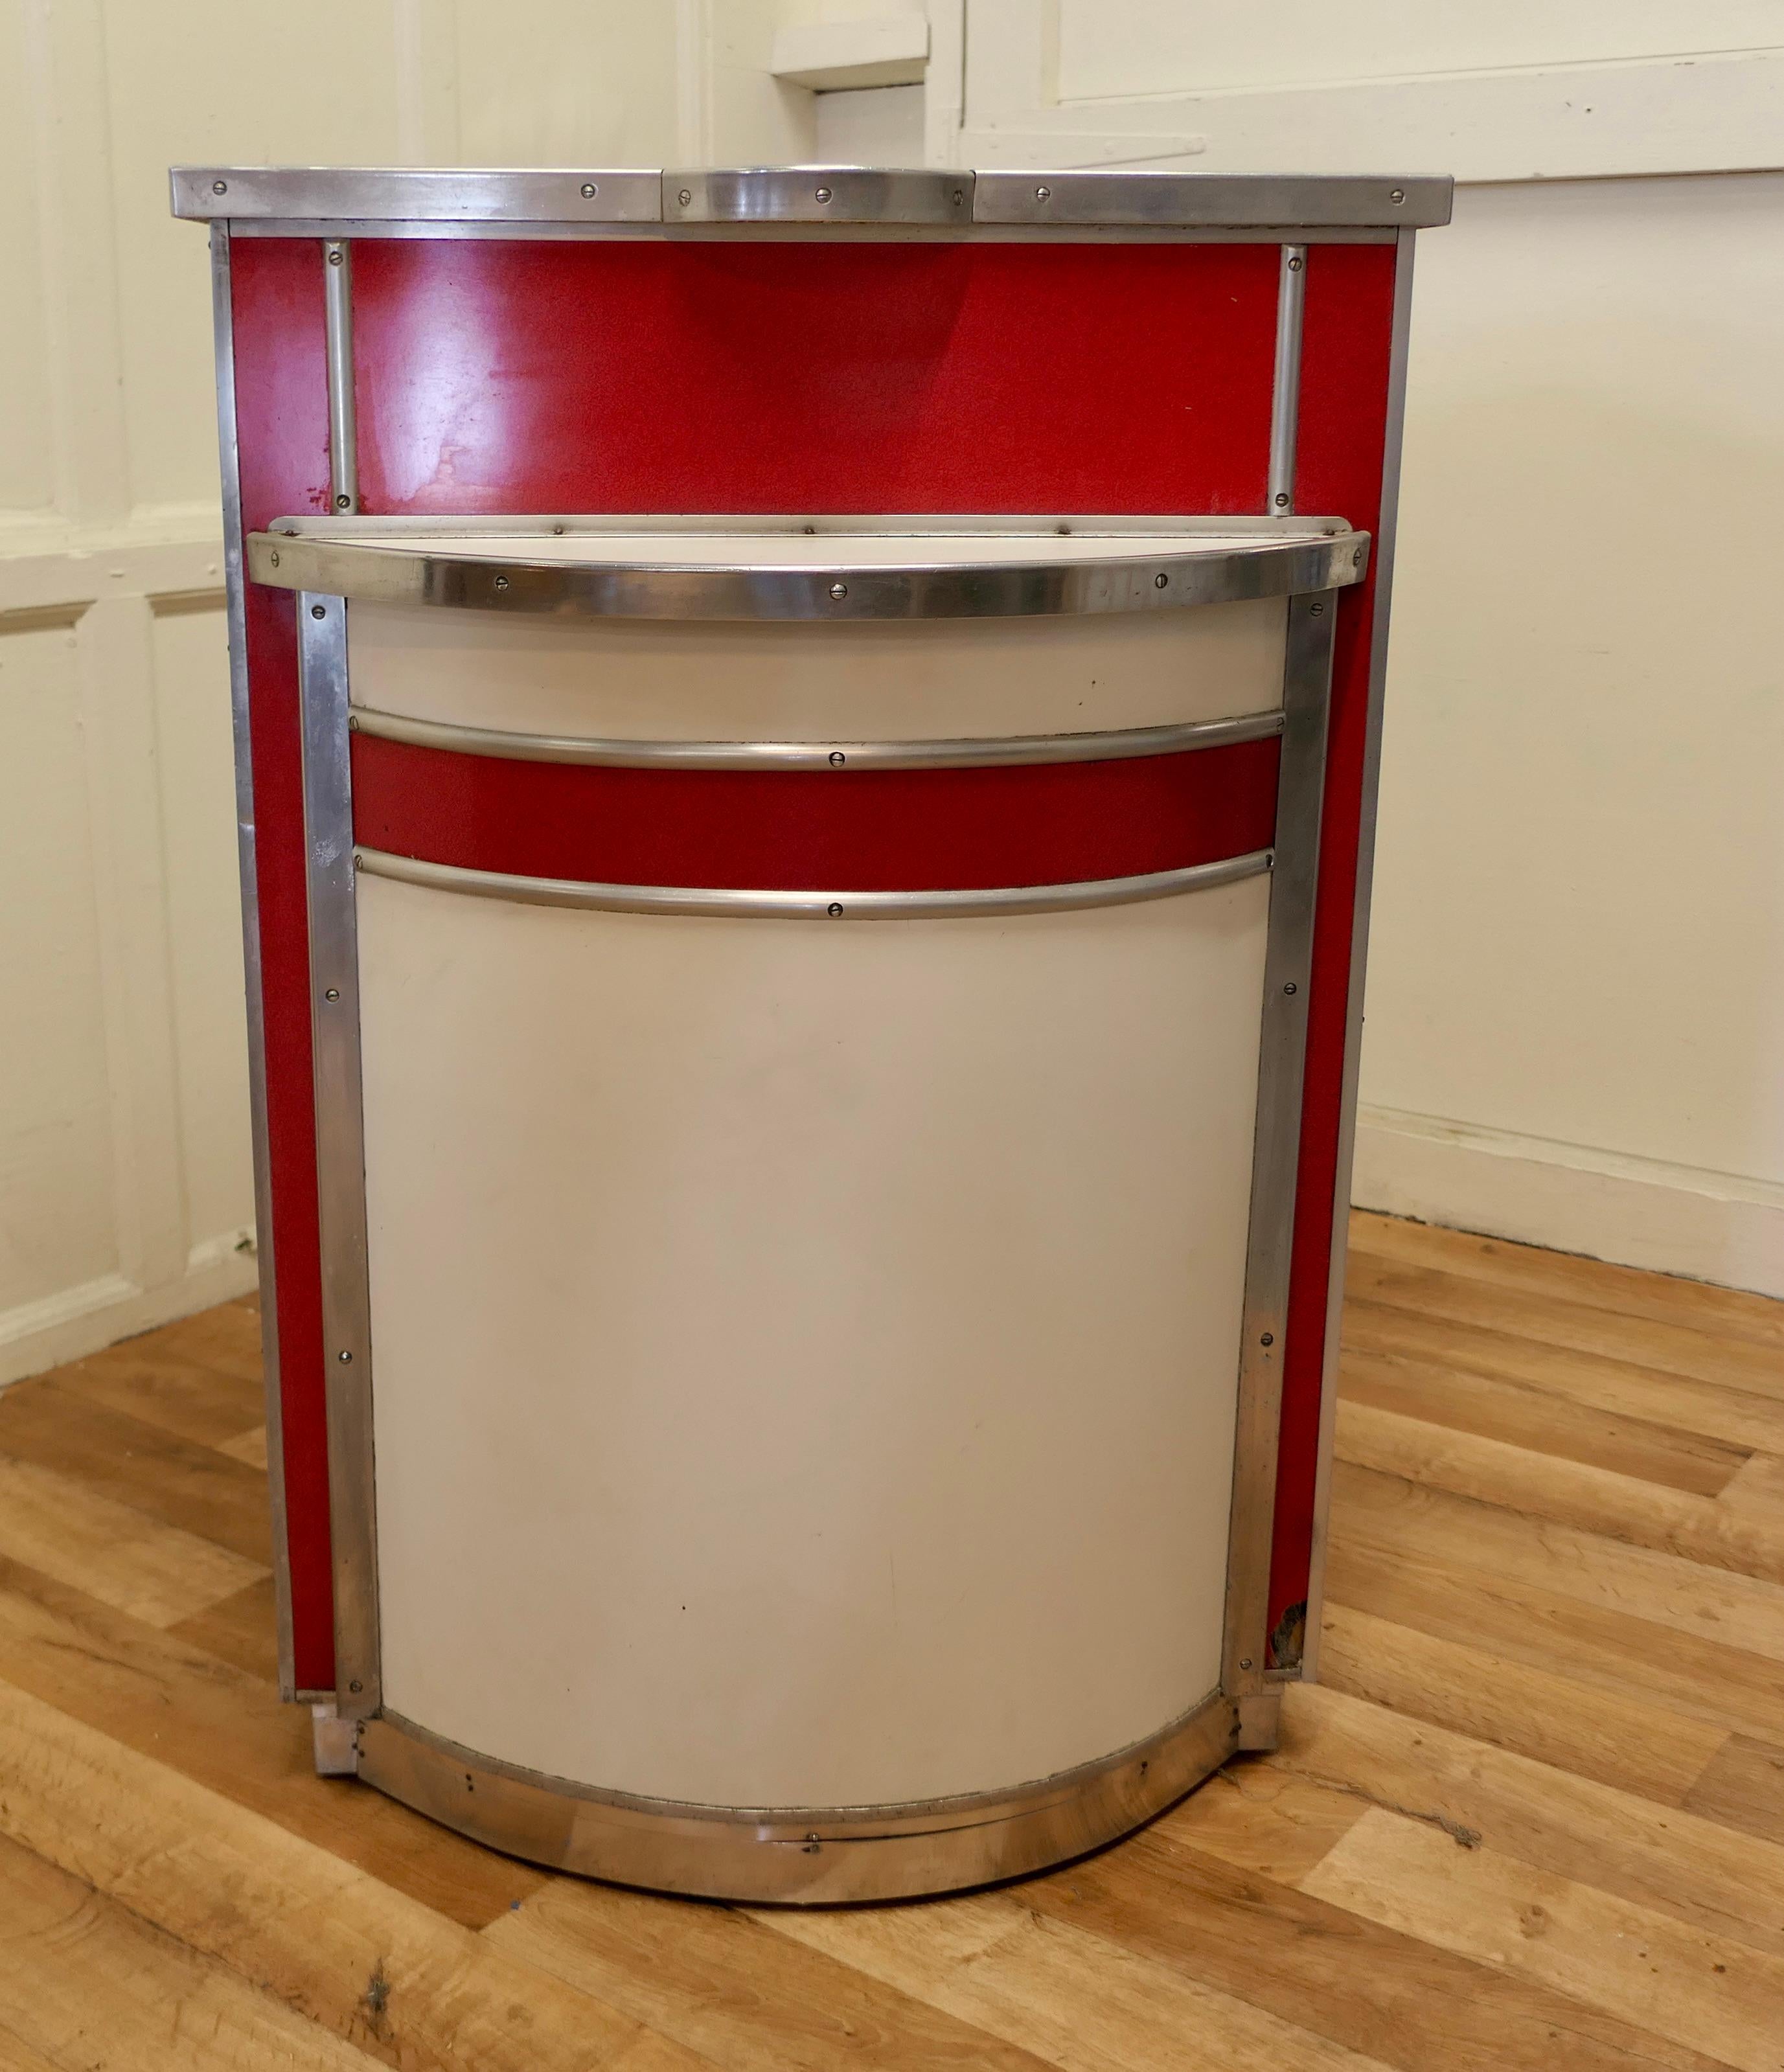 1950s Vintage Dry Bar Reception Desk Formica Diner Greeter

A superb and extremely rare piece, the greeter comes from a French Trucker’s Diner, it is finished in very striking Red and White Formica with a shiny aluminium  trim
The Classic design of